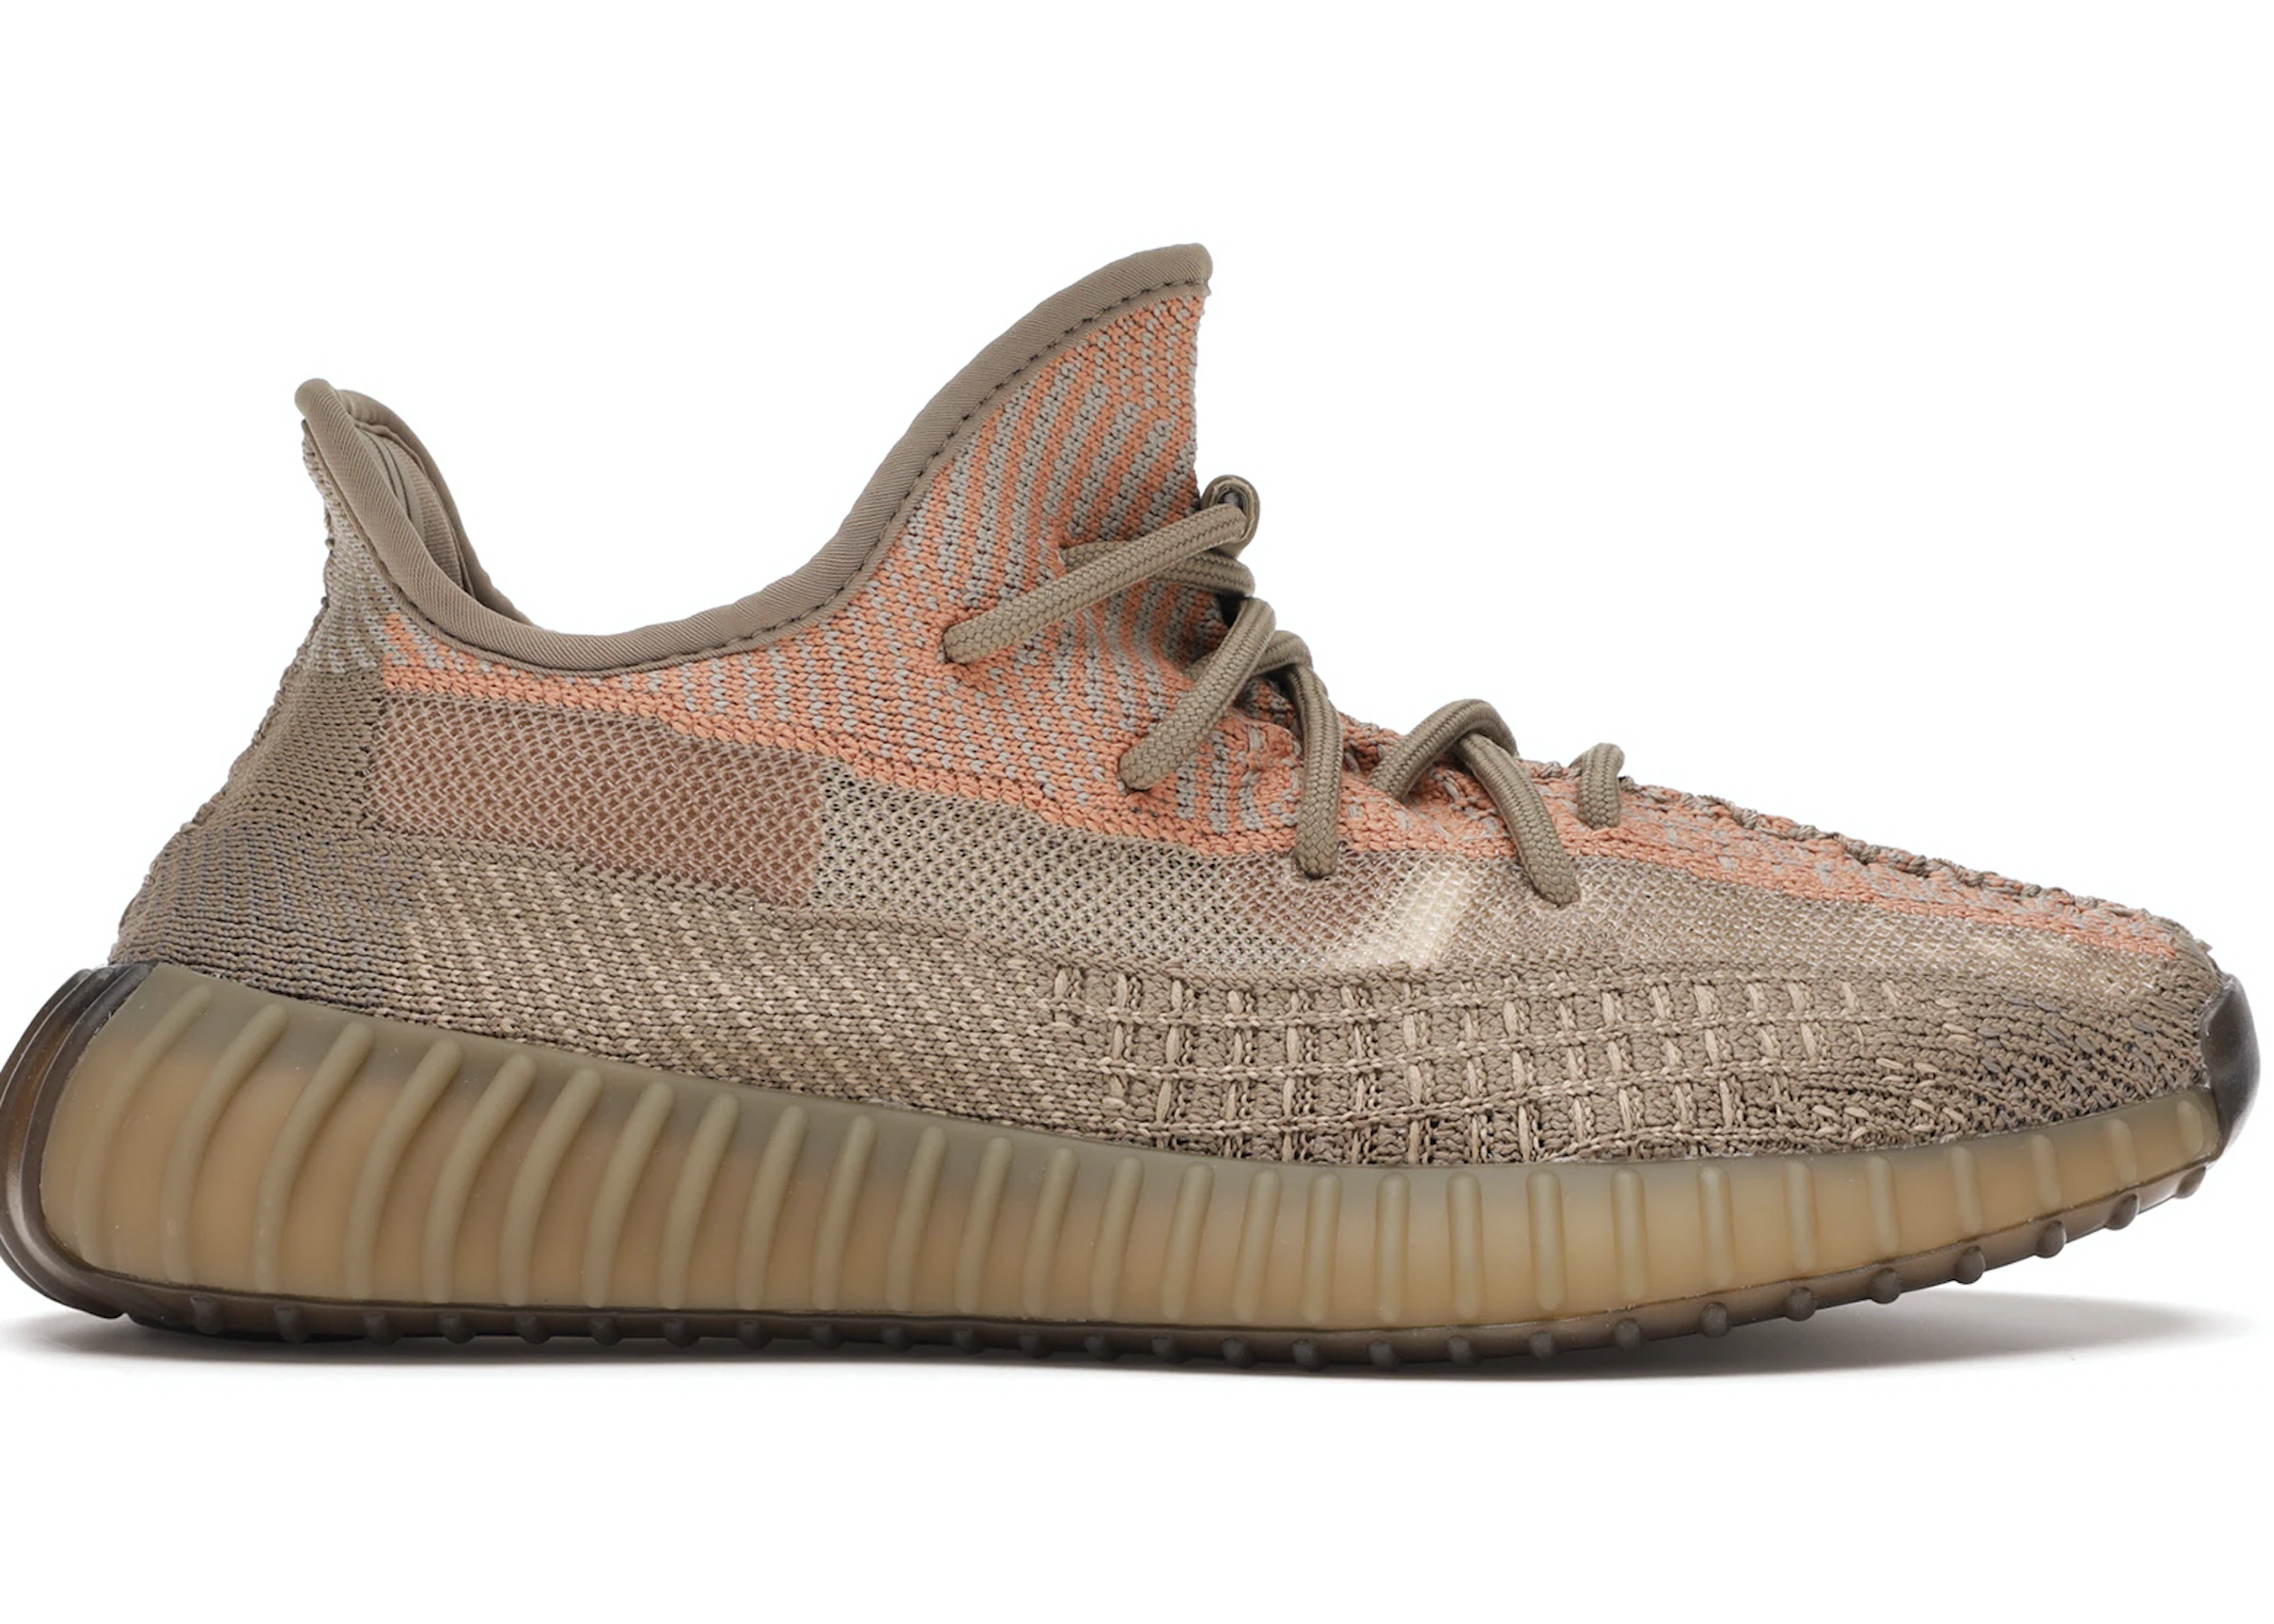 Funeral So-called Damn it adidas Yeezy Boost 350 V2 Sand Taupe - FZ5240 - US